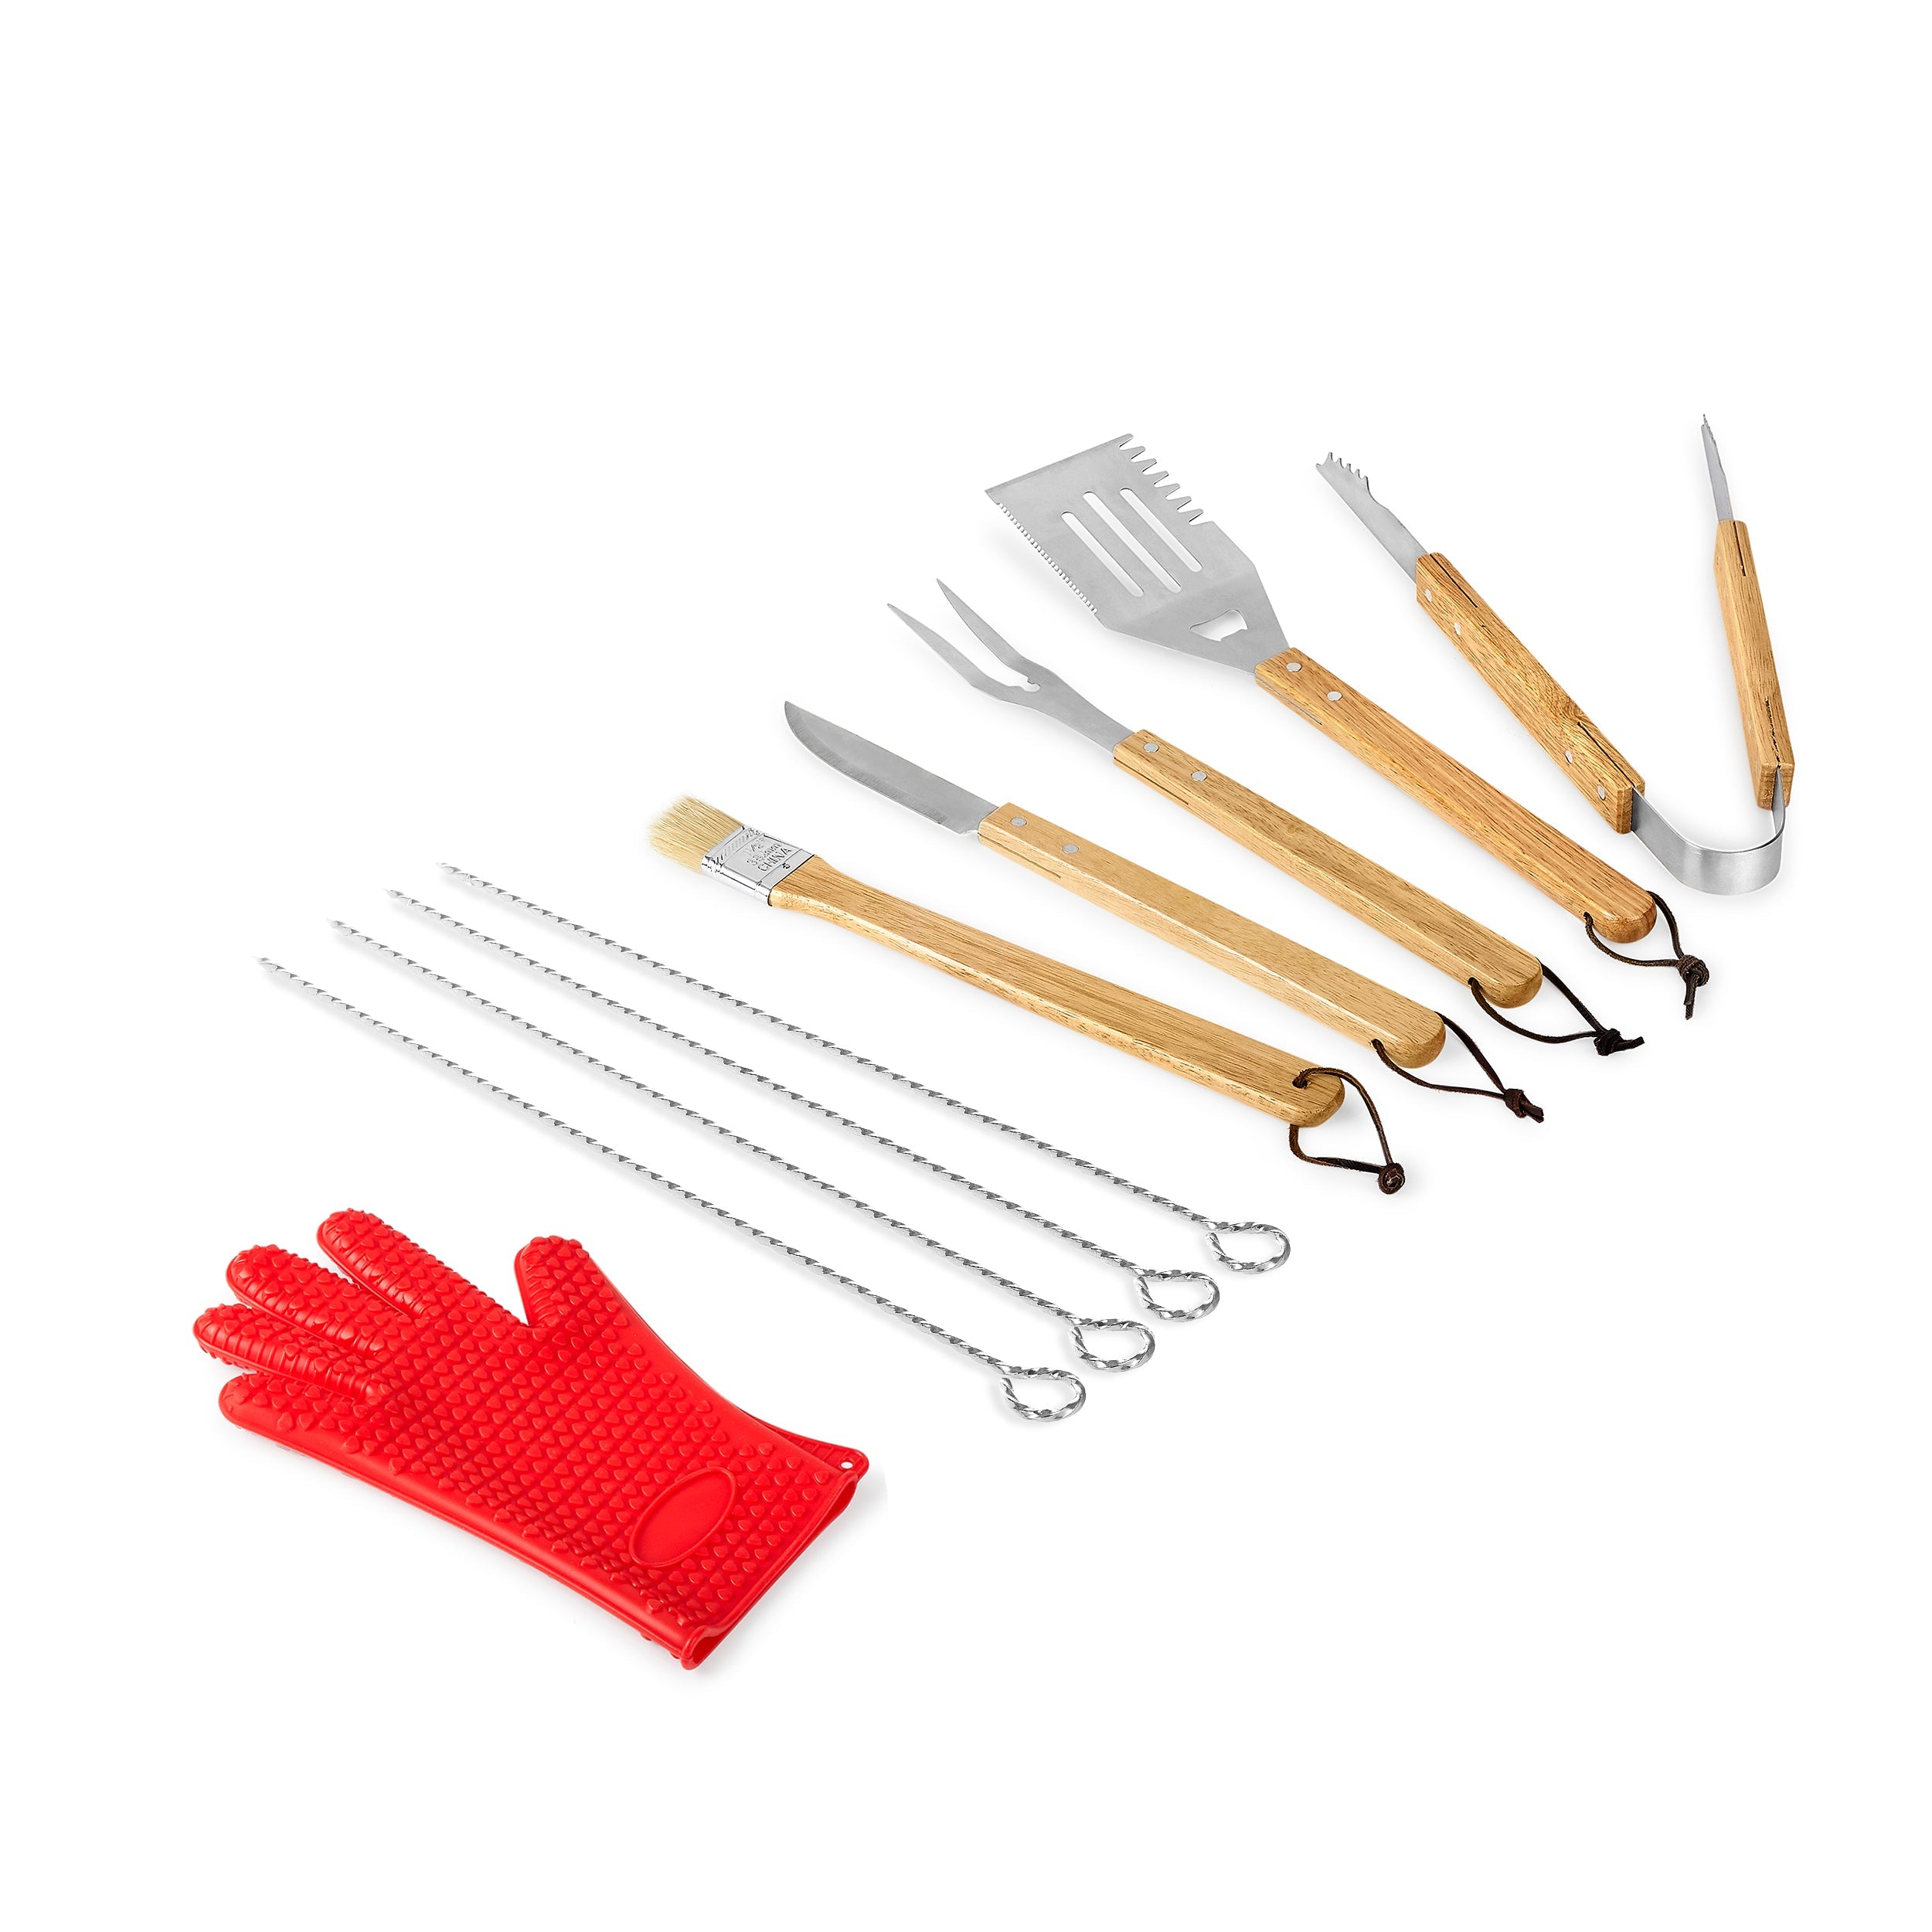 11 Piece BBQ Grill Set for Wedding with Personalization